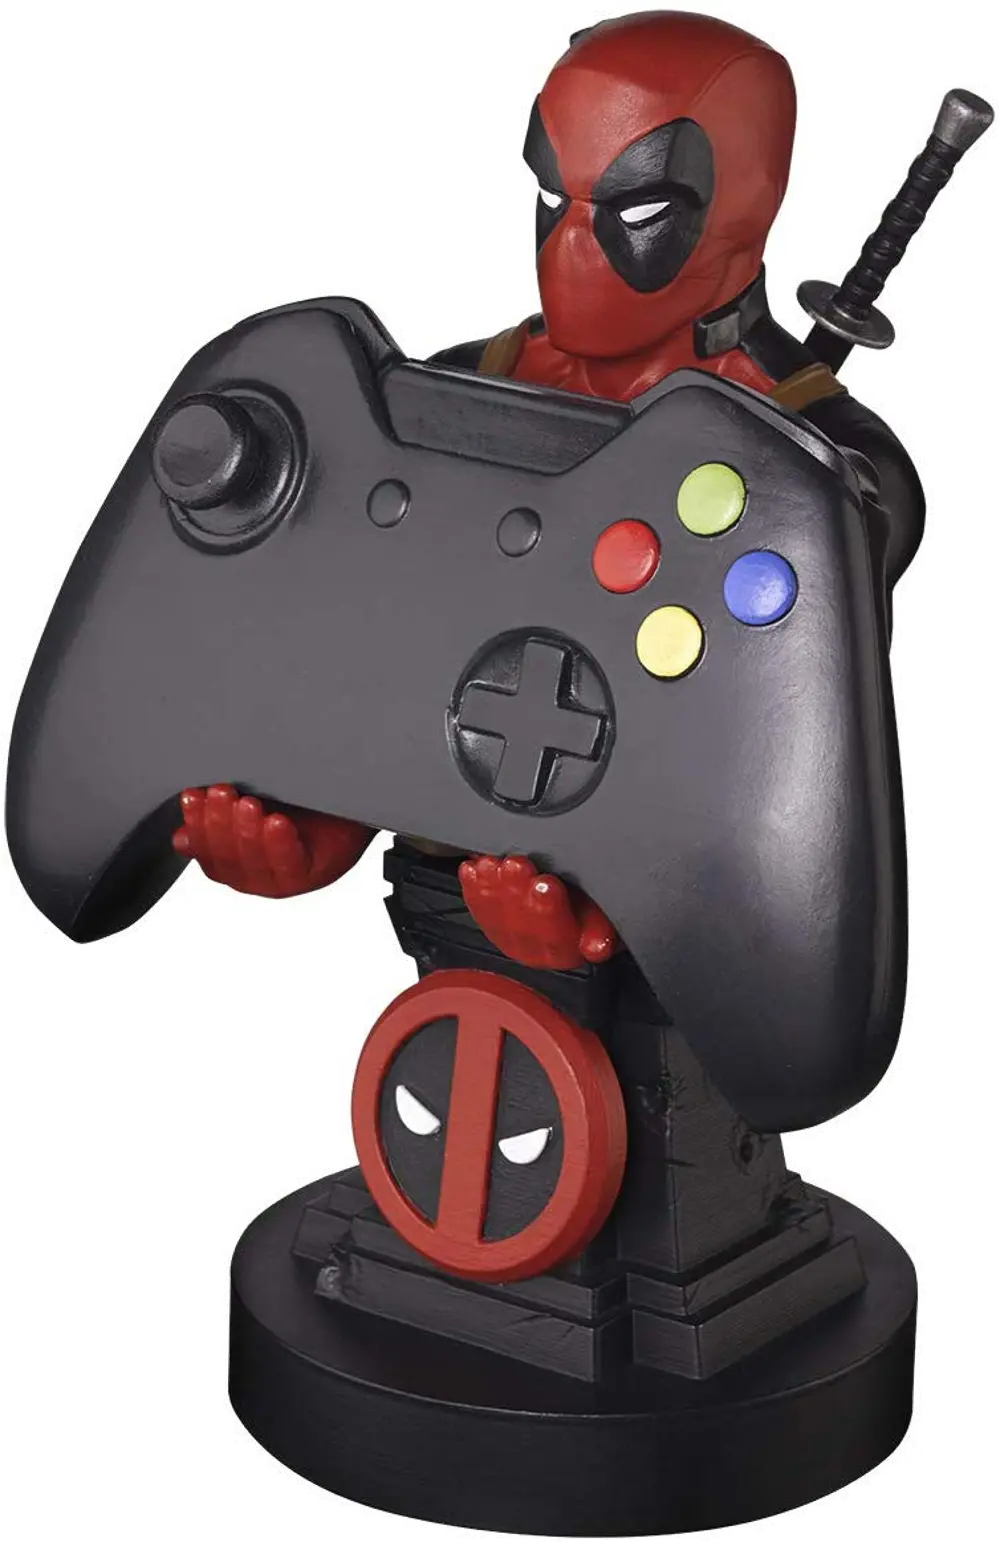 Deadpool Cable Guy - Controller and Device Holder-1